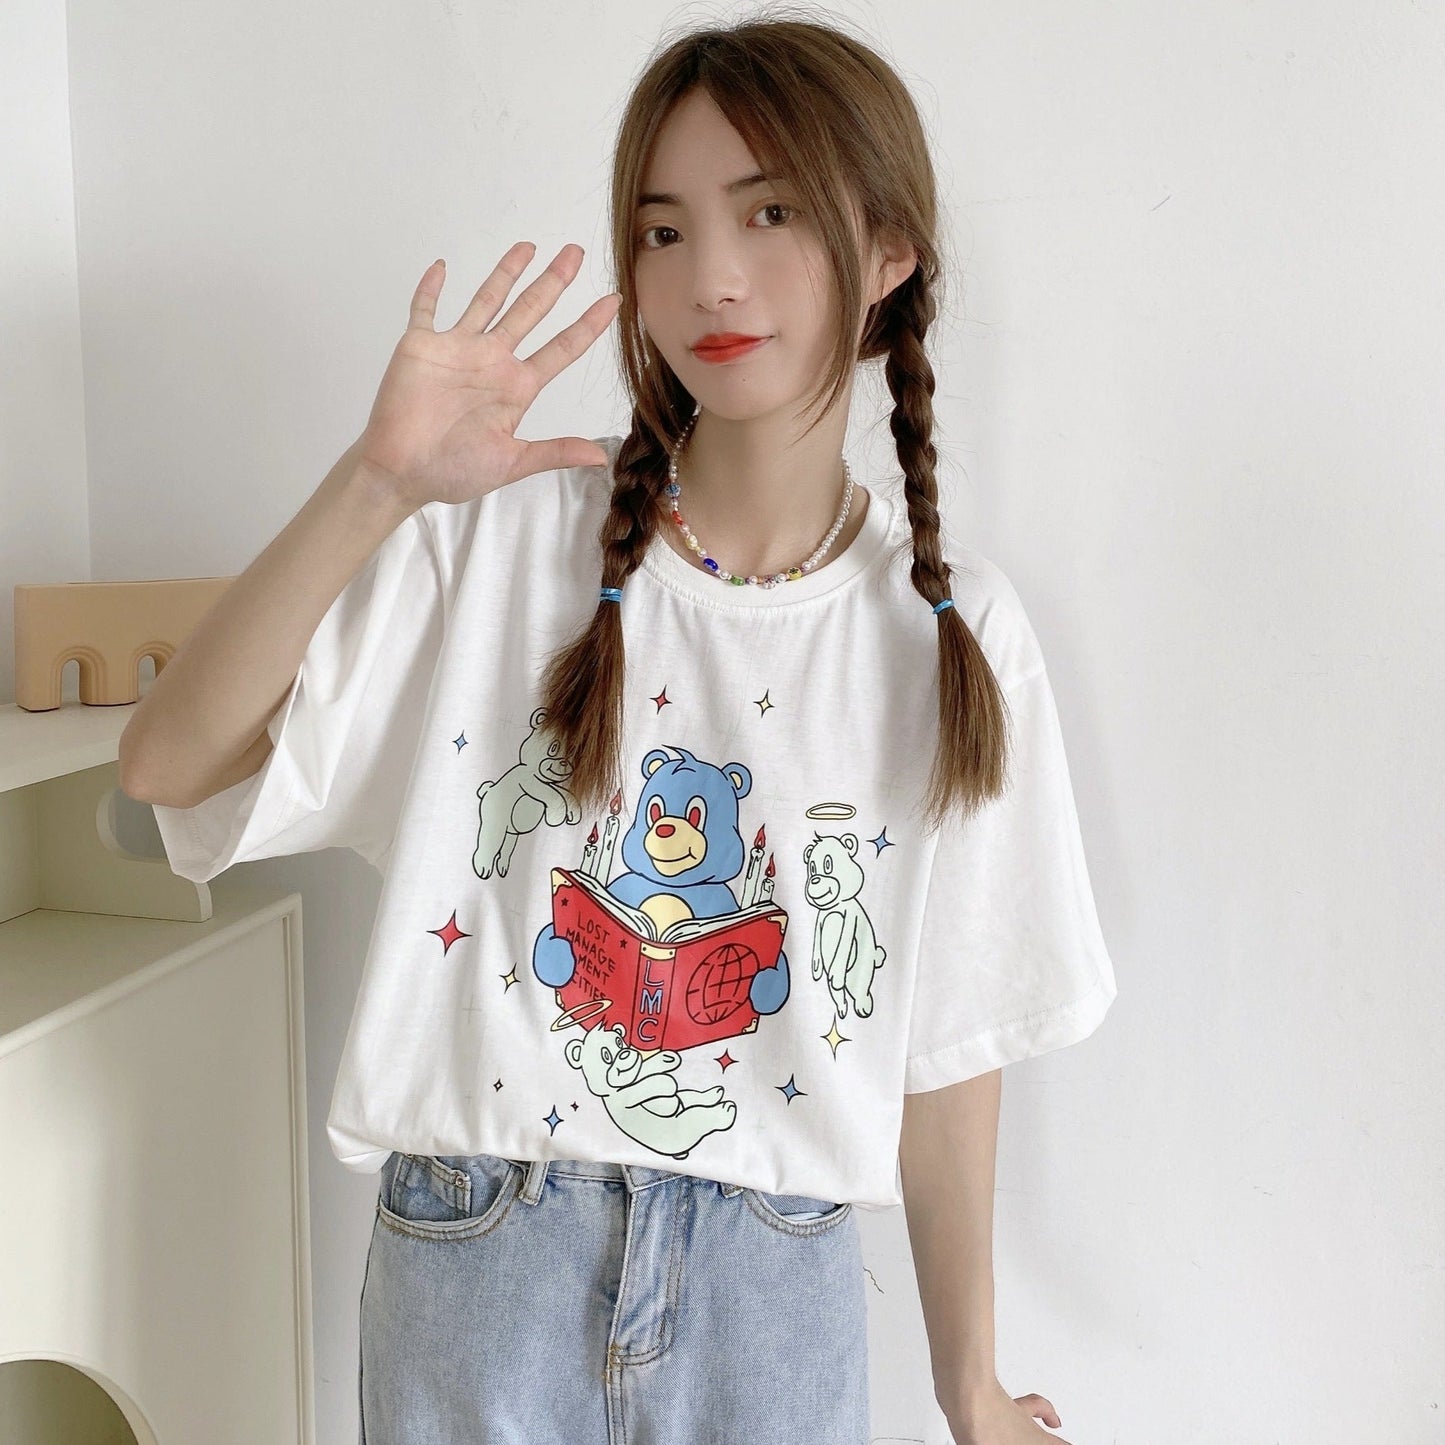 Enhyphen Heeseung Inspired White Loose T-Shirt With Bear Print